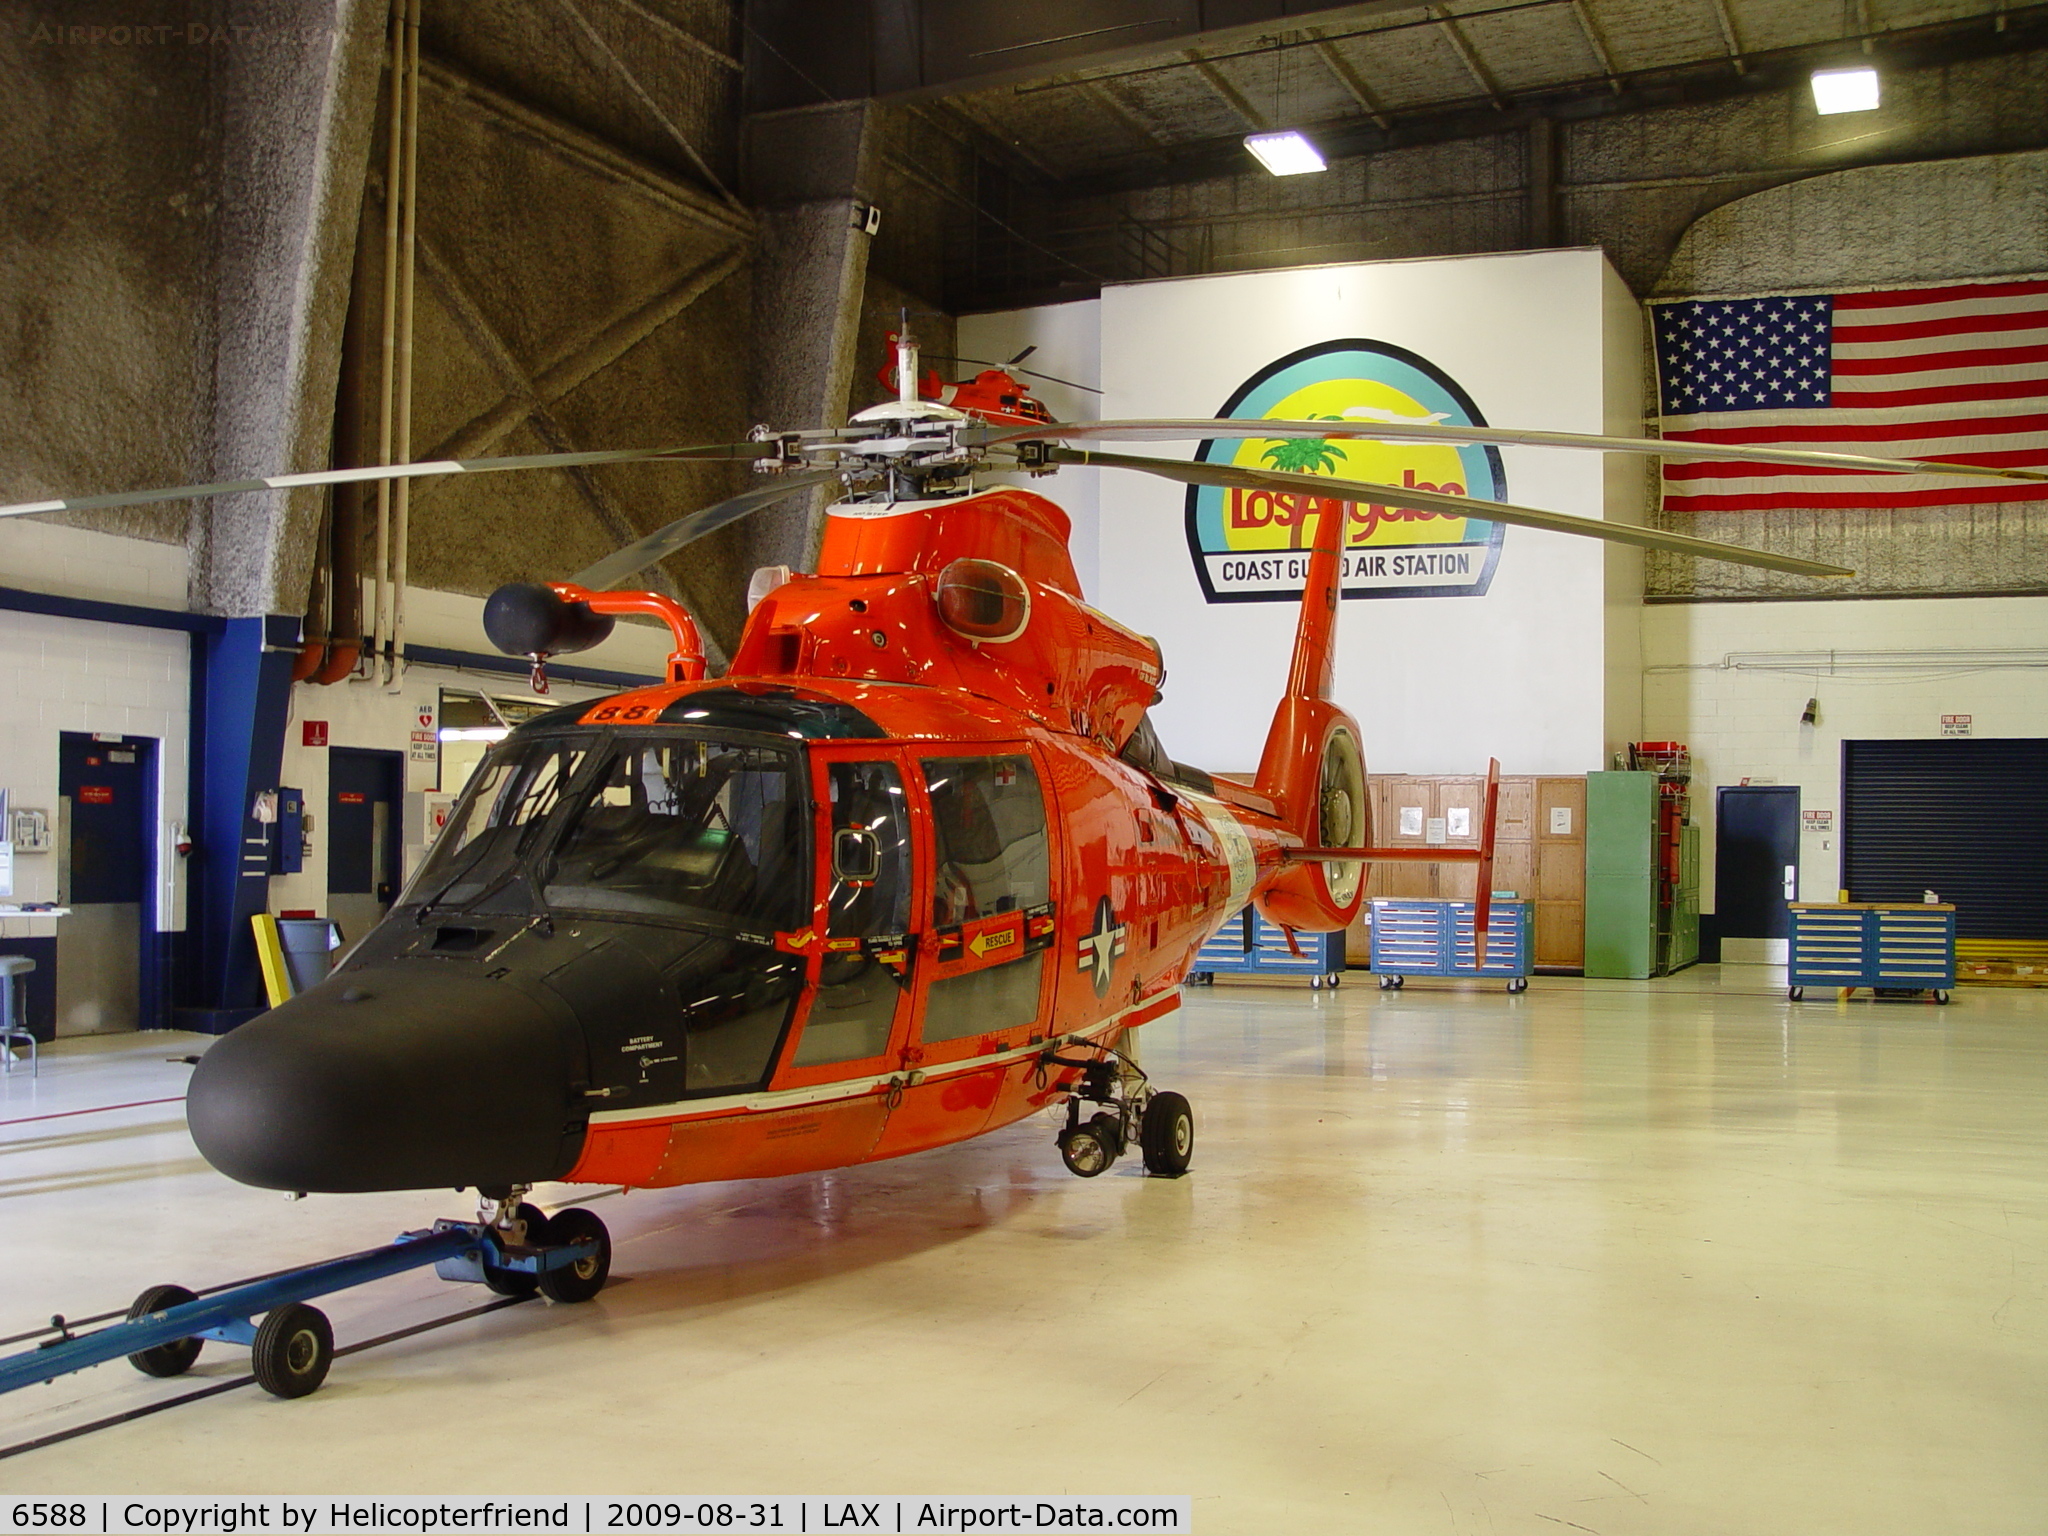 6588, Aérospatiale HH-65C Dauphin C/N 6288, Parked in the hanger at Coast Guard Air Station Los Angeles